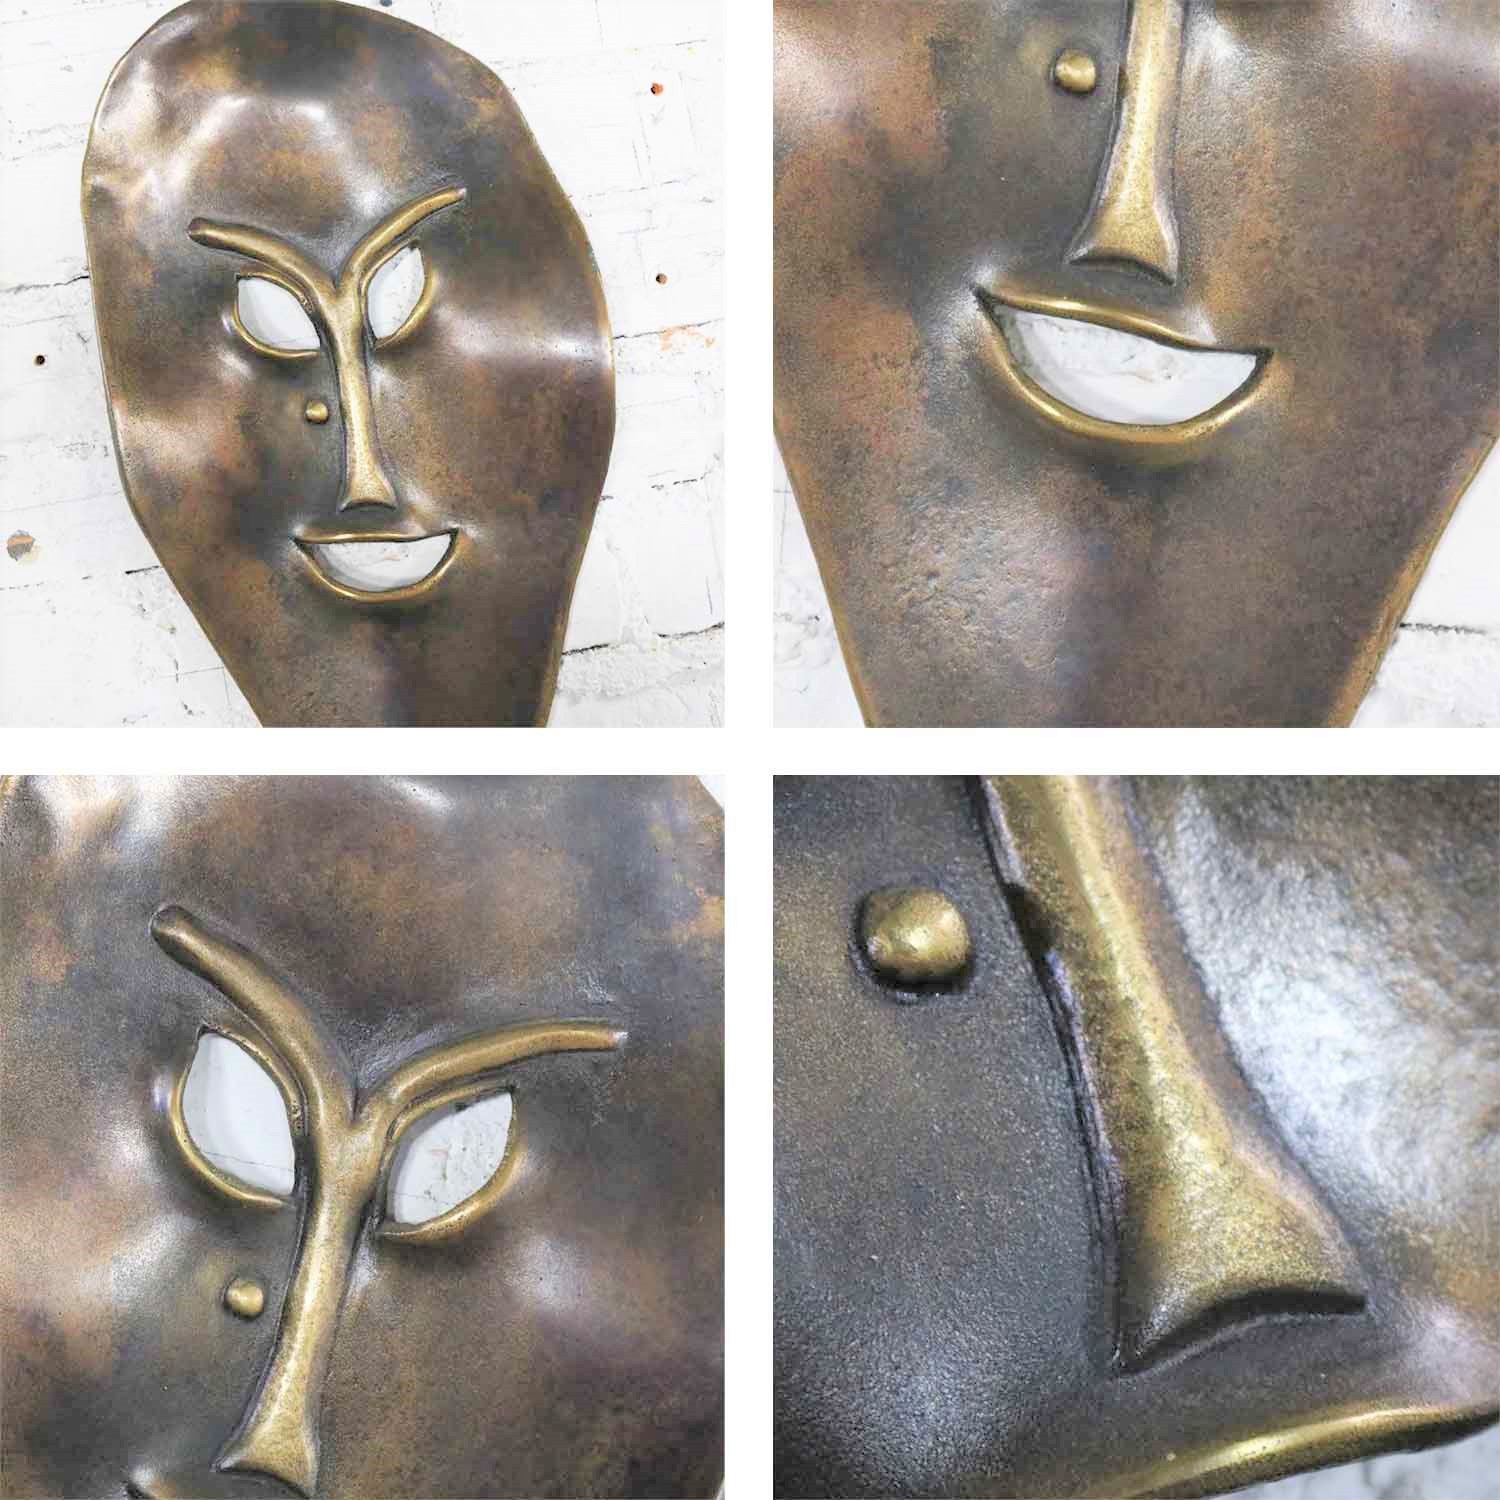 Solid Cast Bronze Contemporary Stylized Mask by Joe Sutcliffe